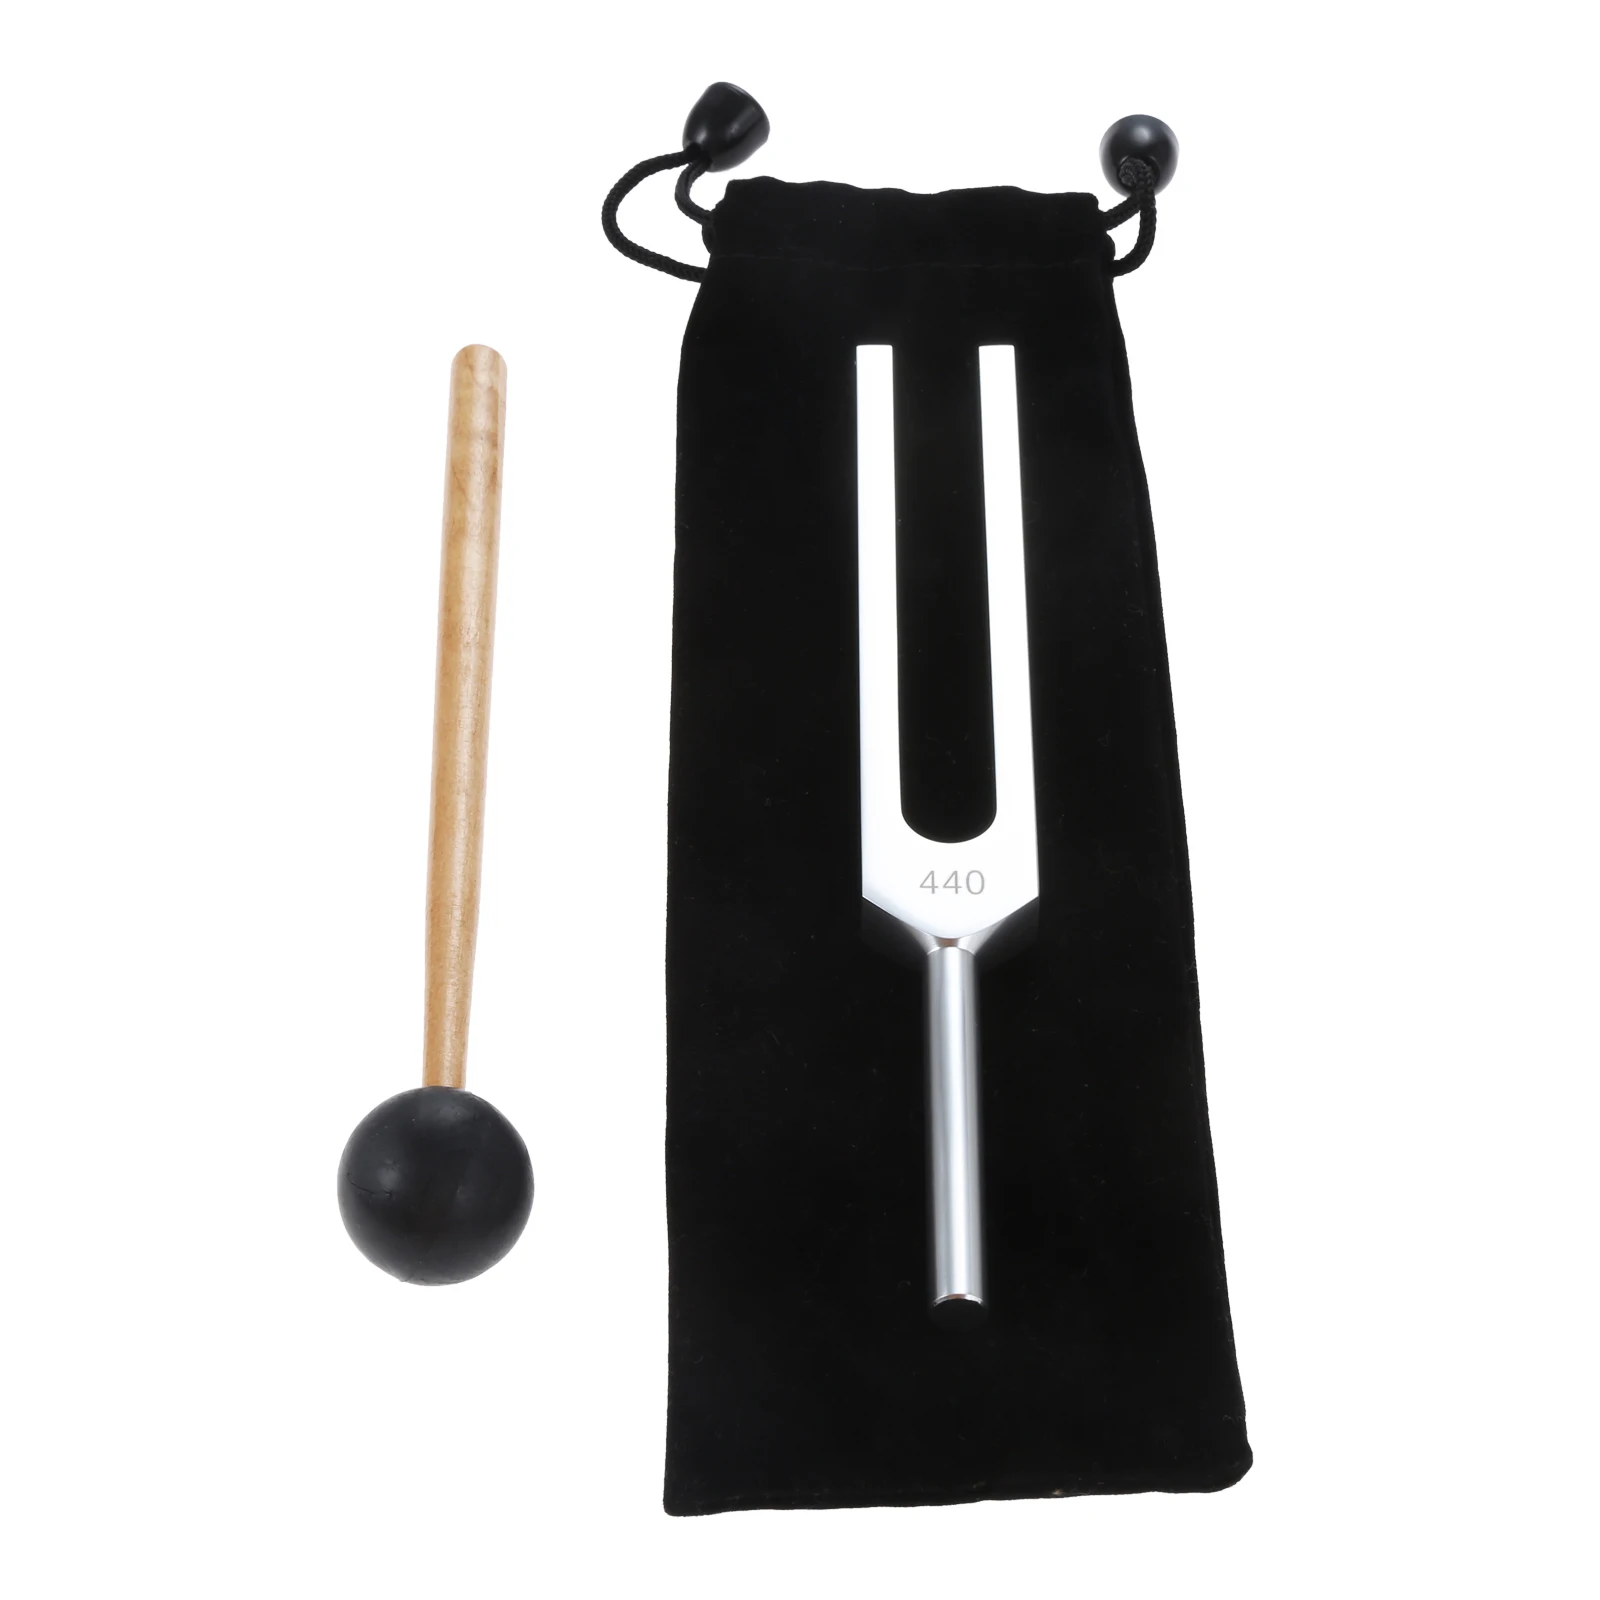 

440Hz Tuning Fork with Silicone Hammer & Bag for DNA Repair Healing,Sound Therapy,Musical Instrument,Balancing,Healers,Vibration